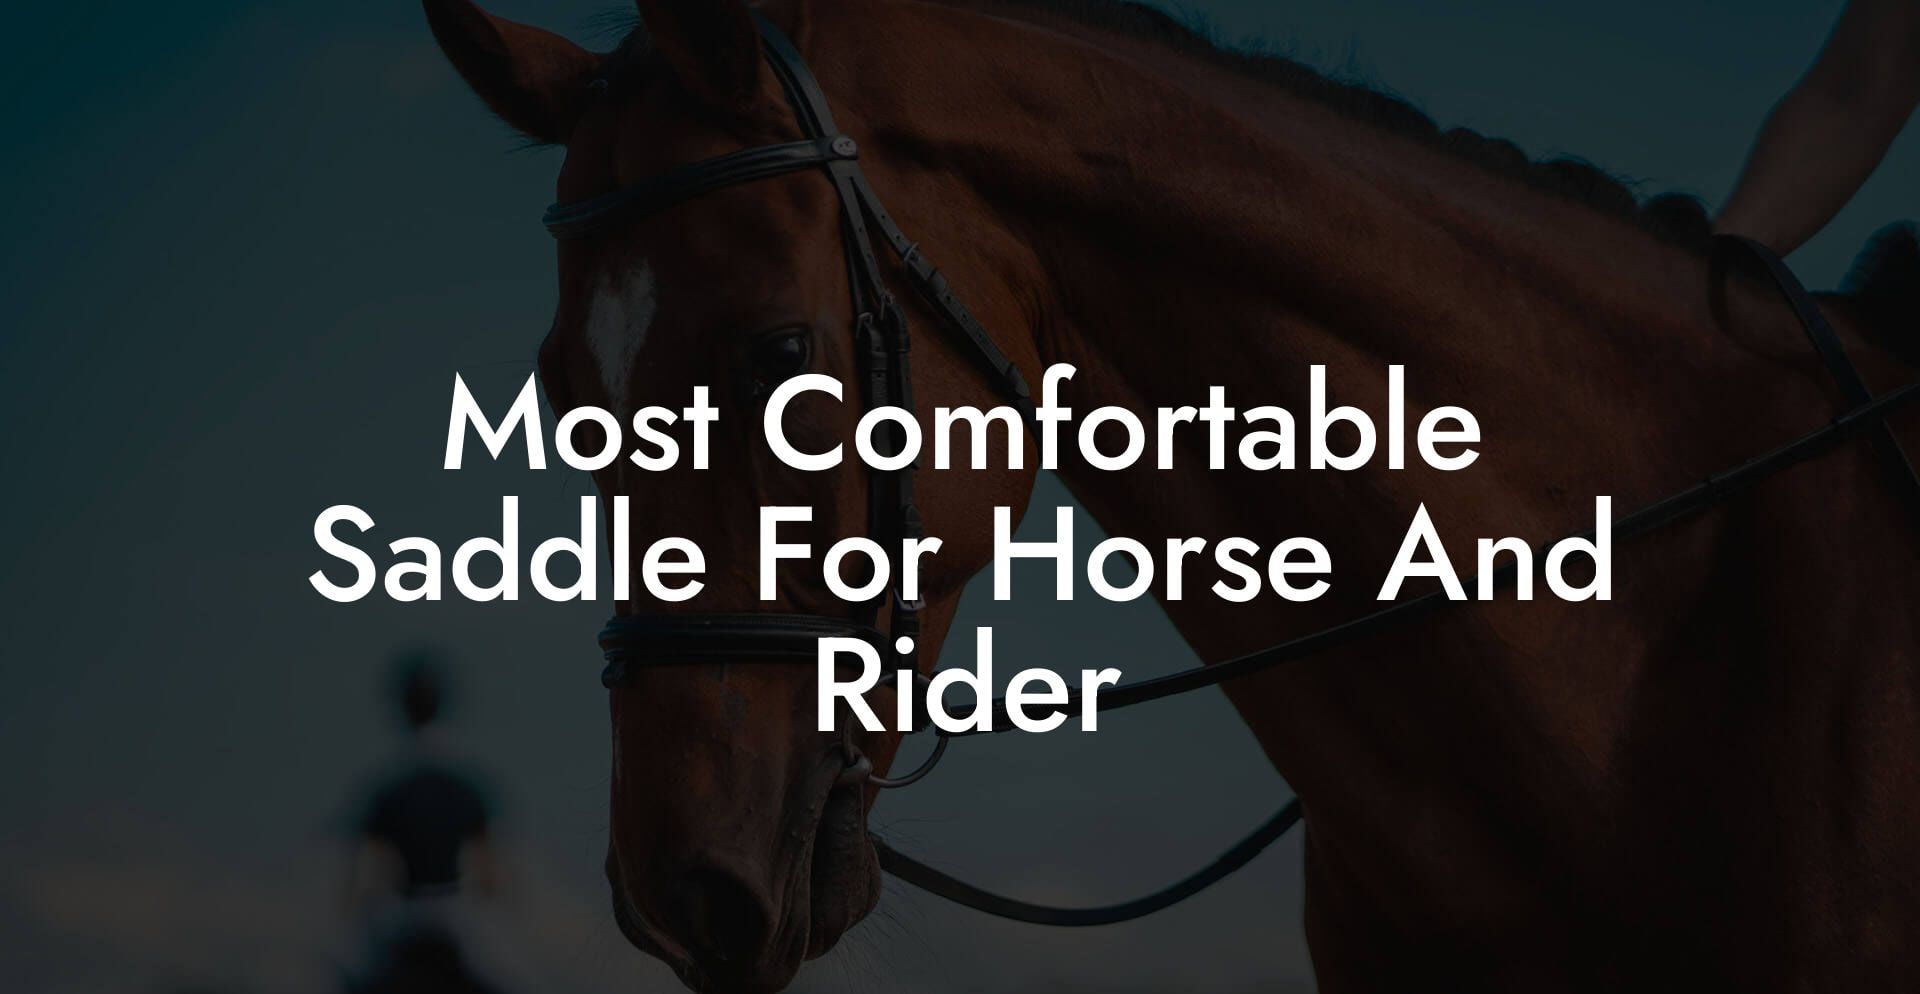 Most Comfortable Saddle For Horse And Rider